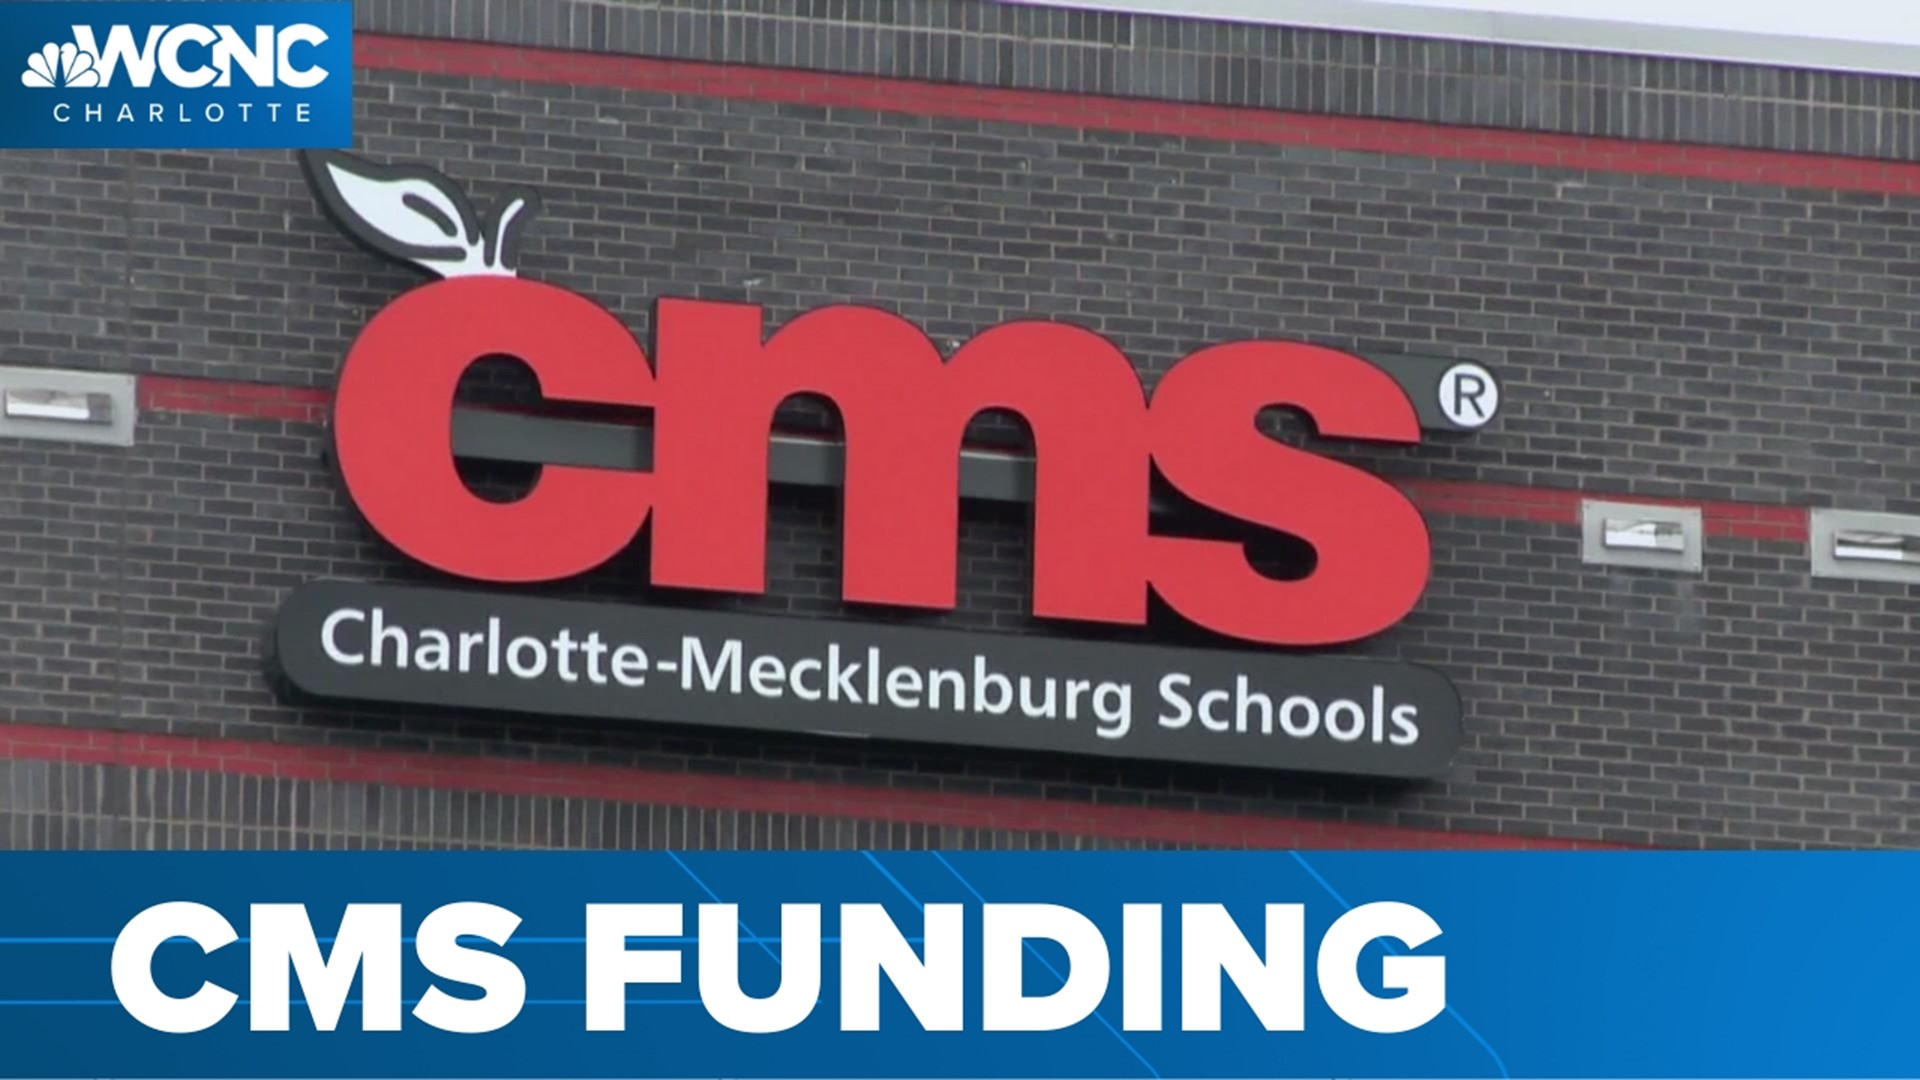 Many questions tonight after a budget blow for Charlotte Mecklenburg schools.